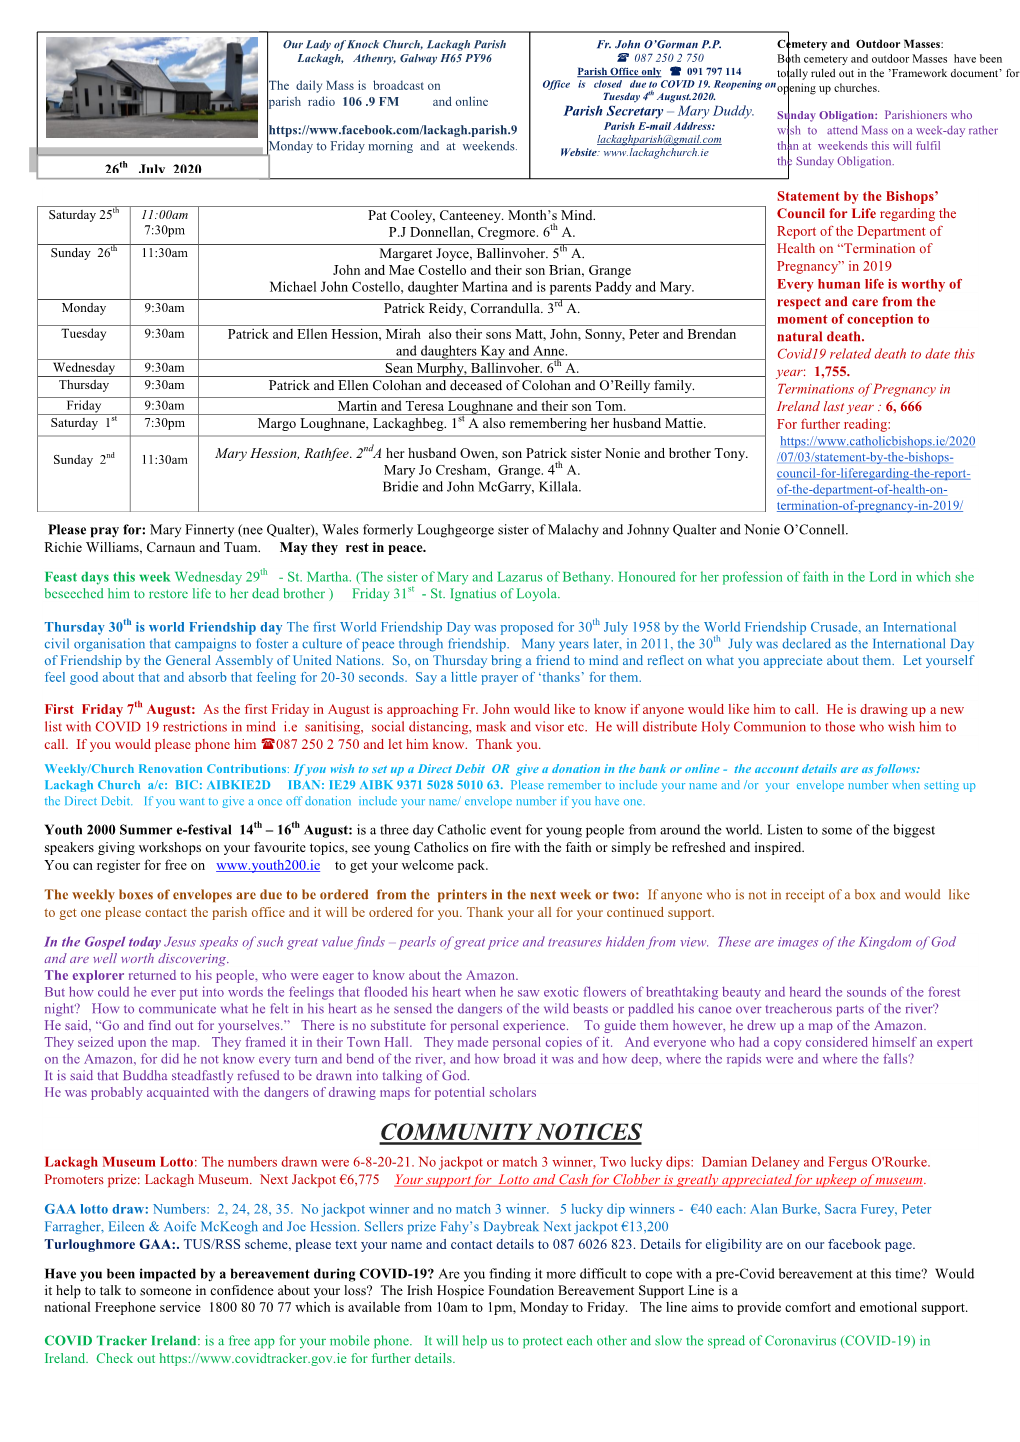 Newsletter 26Th July